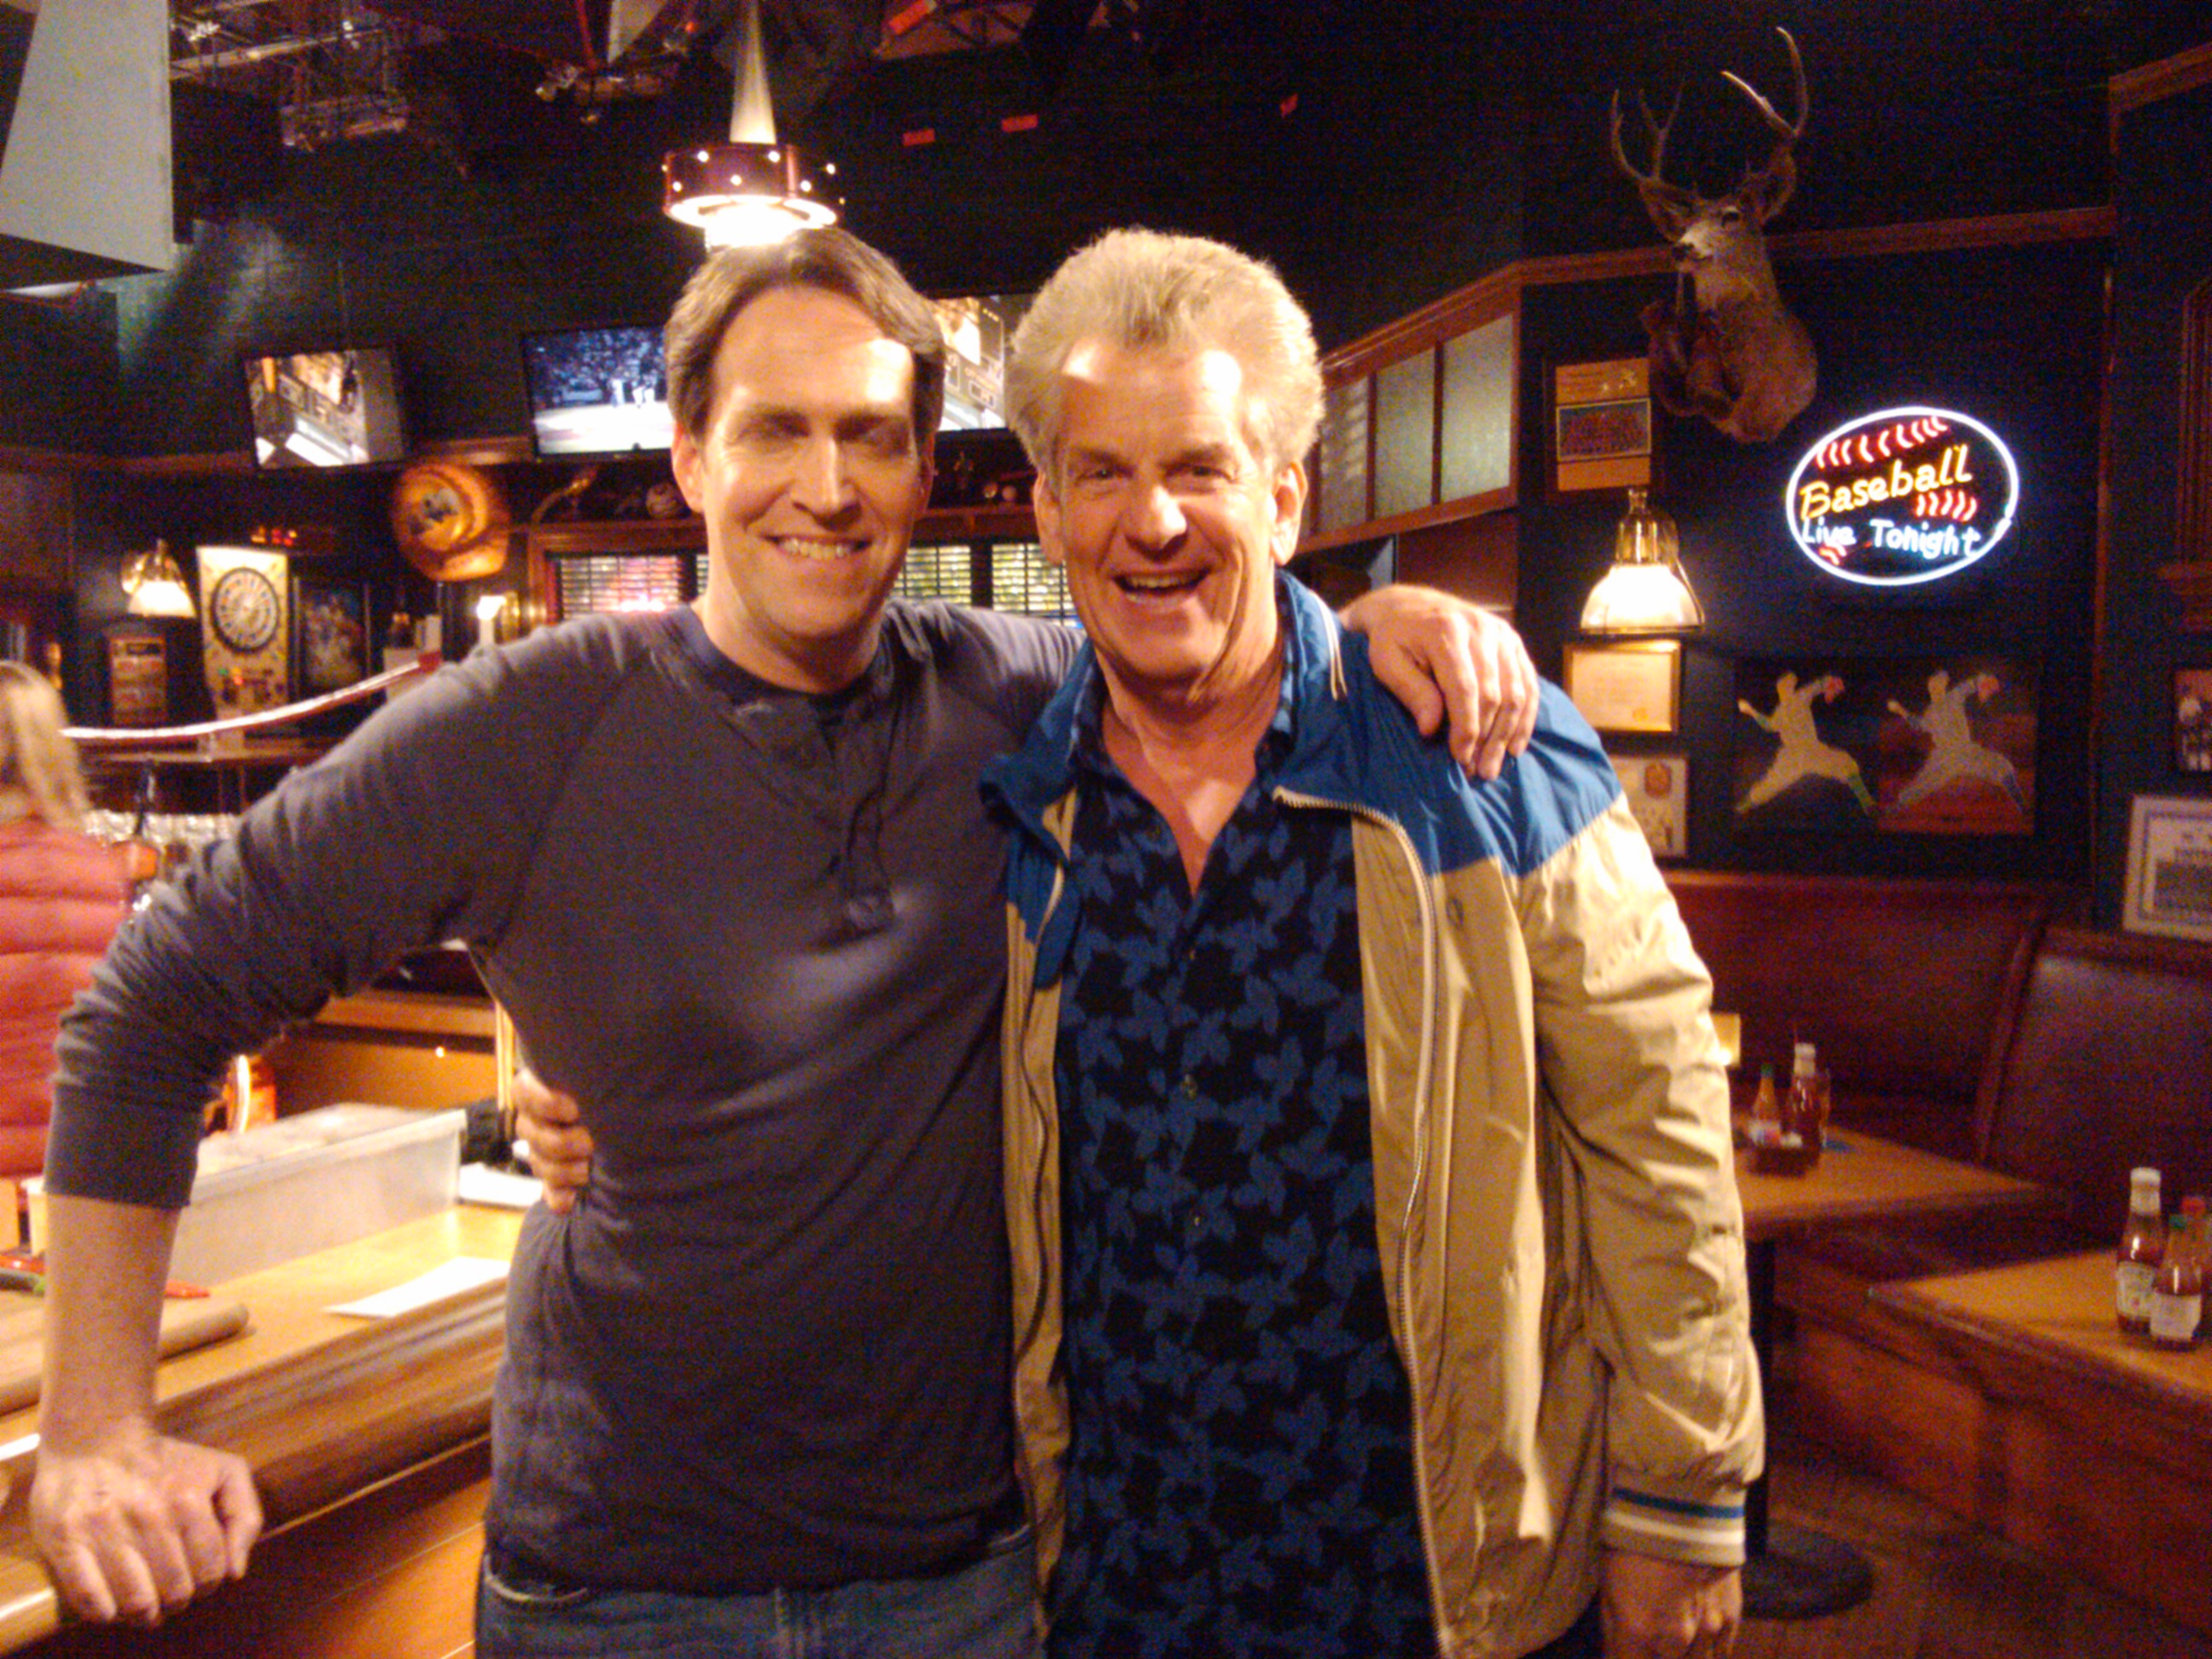 Working with Lenny Clark on 